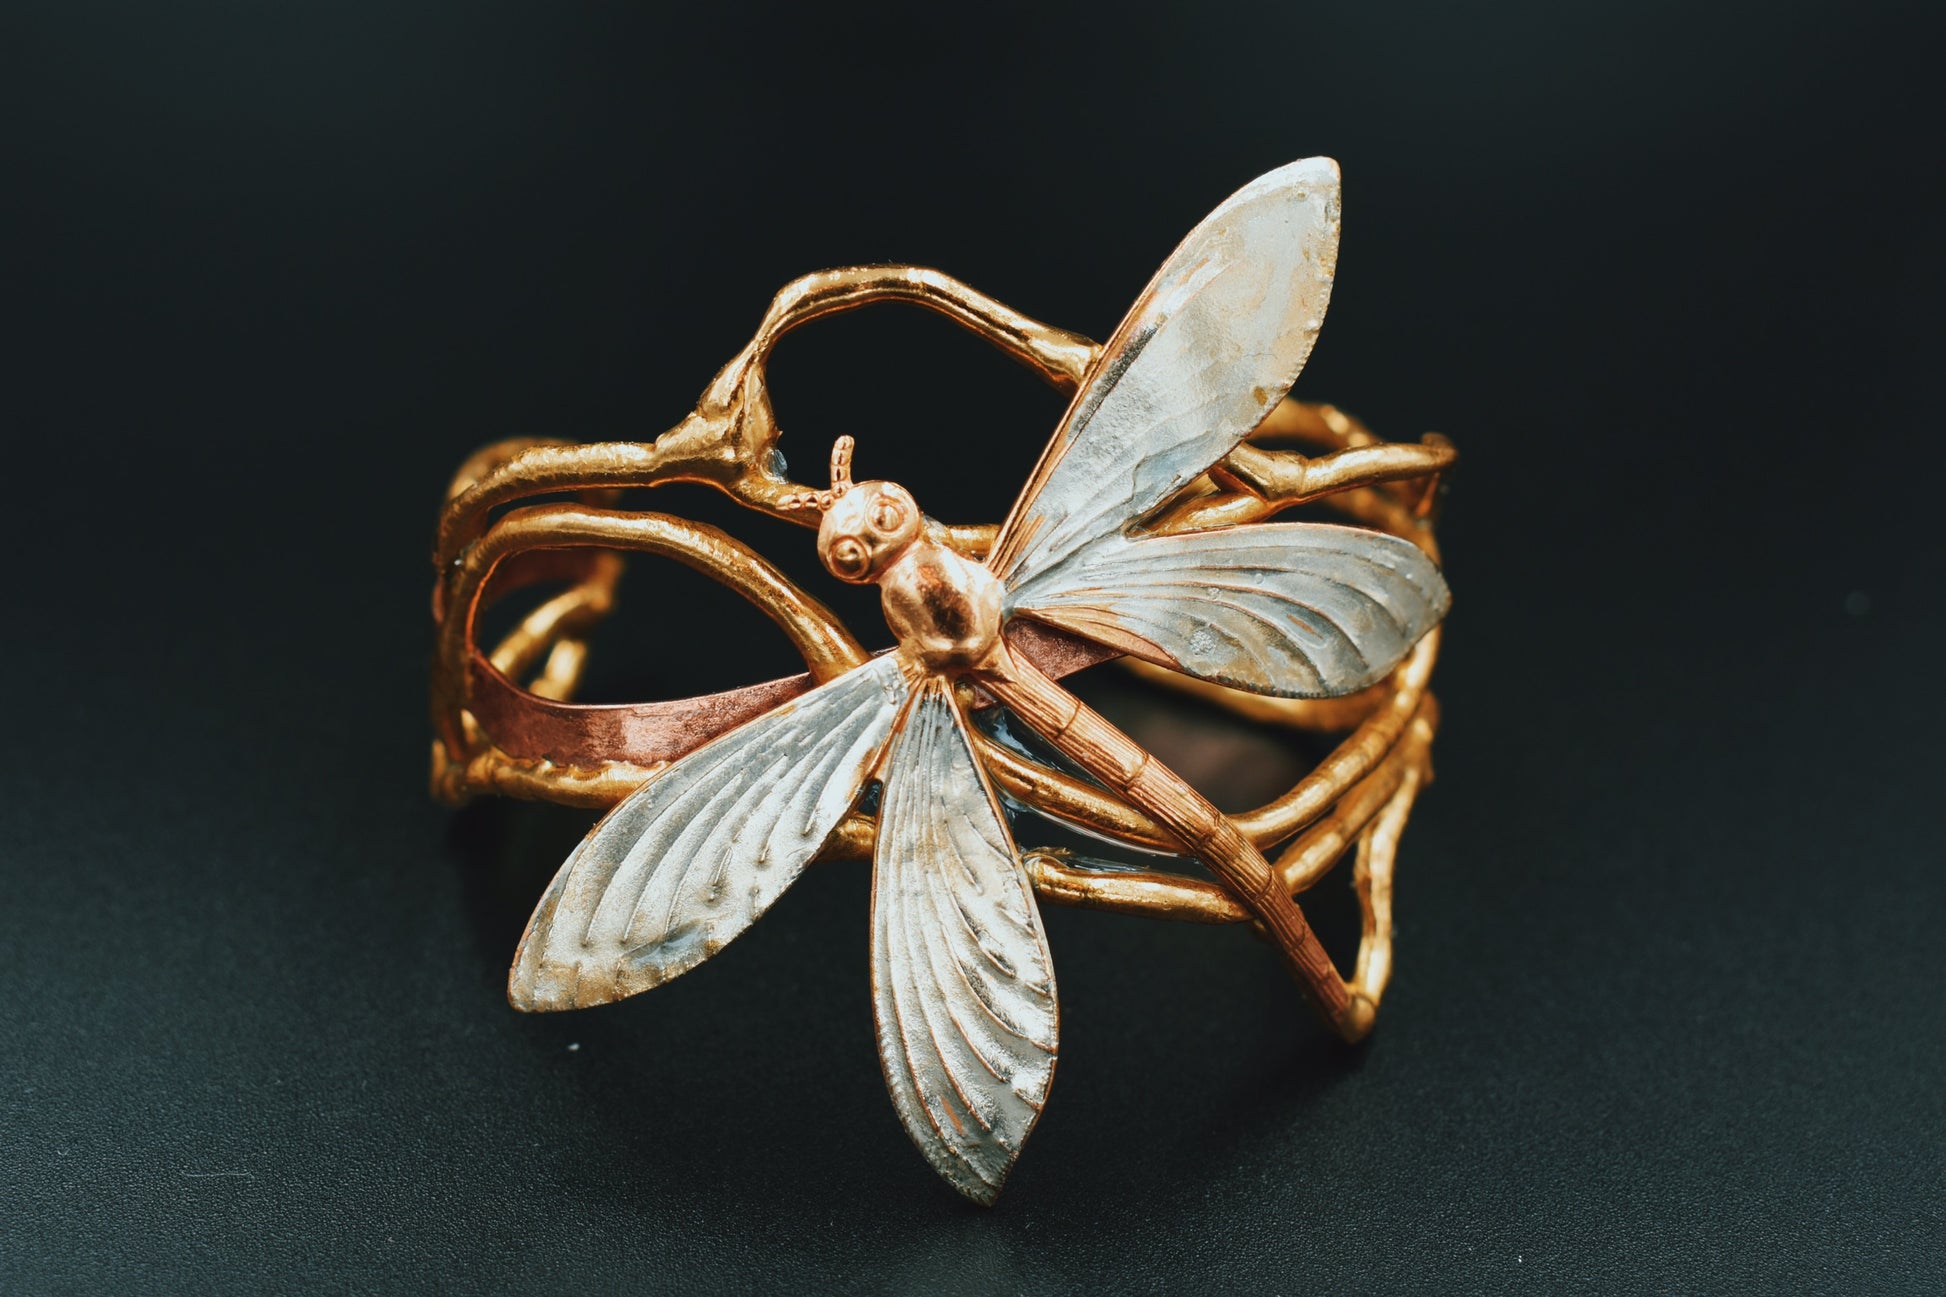 Dragonfly Cuff - Large Dragonfly - Adjustable Brass, bronze, and copper with silver Local Louisiana Artist